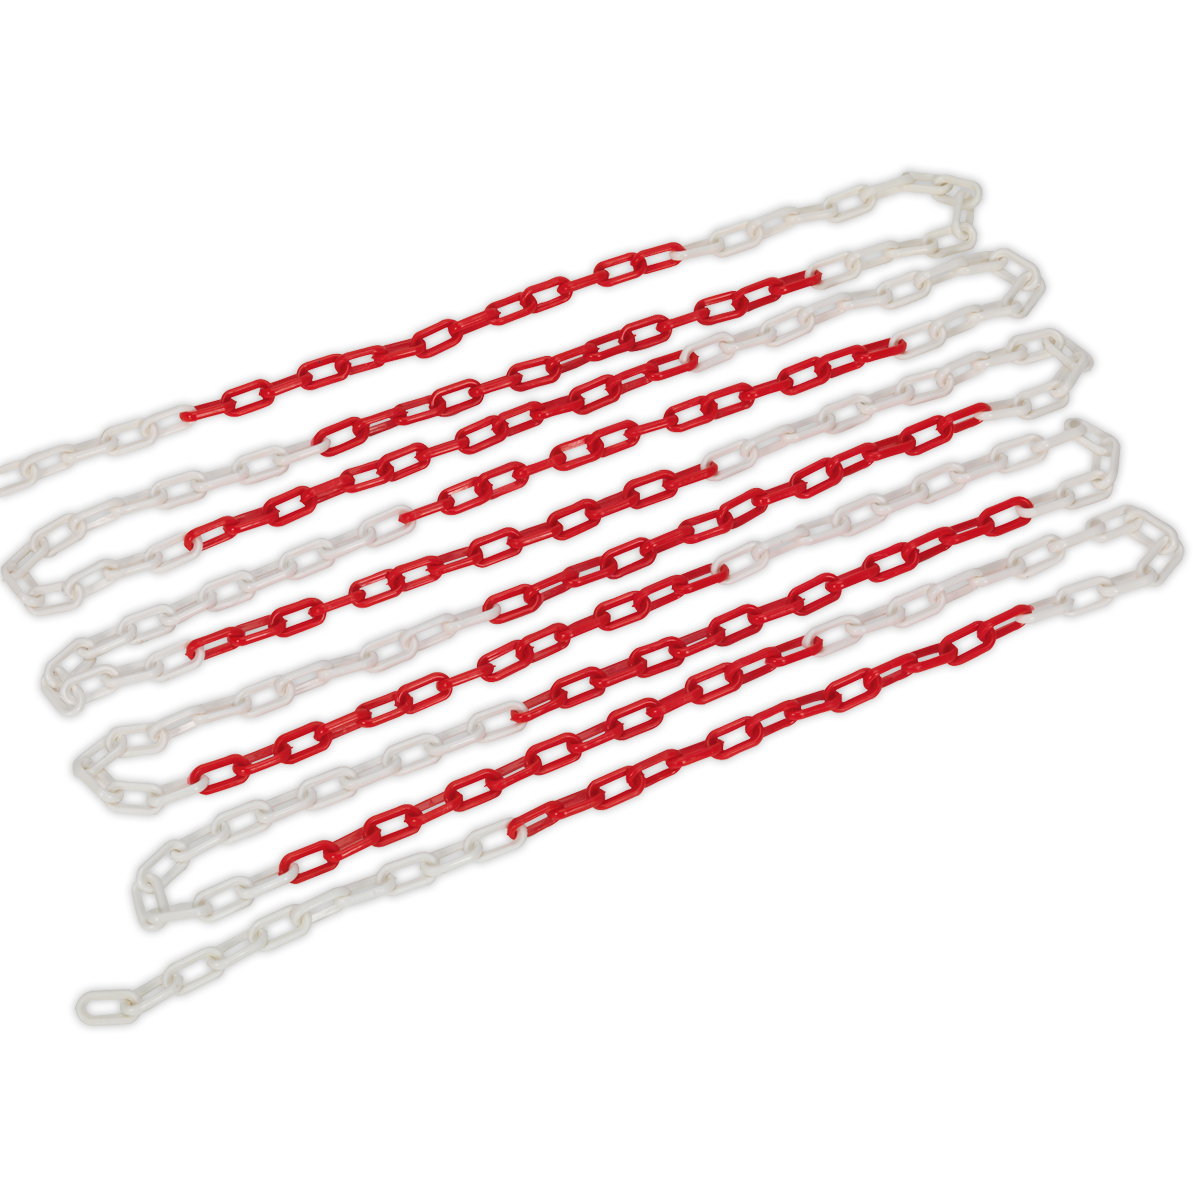 Safety Chain Red/White 25m x 6mm - HSC25M - Farming Parts